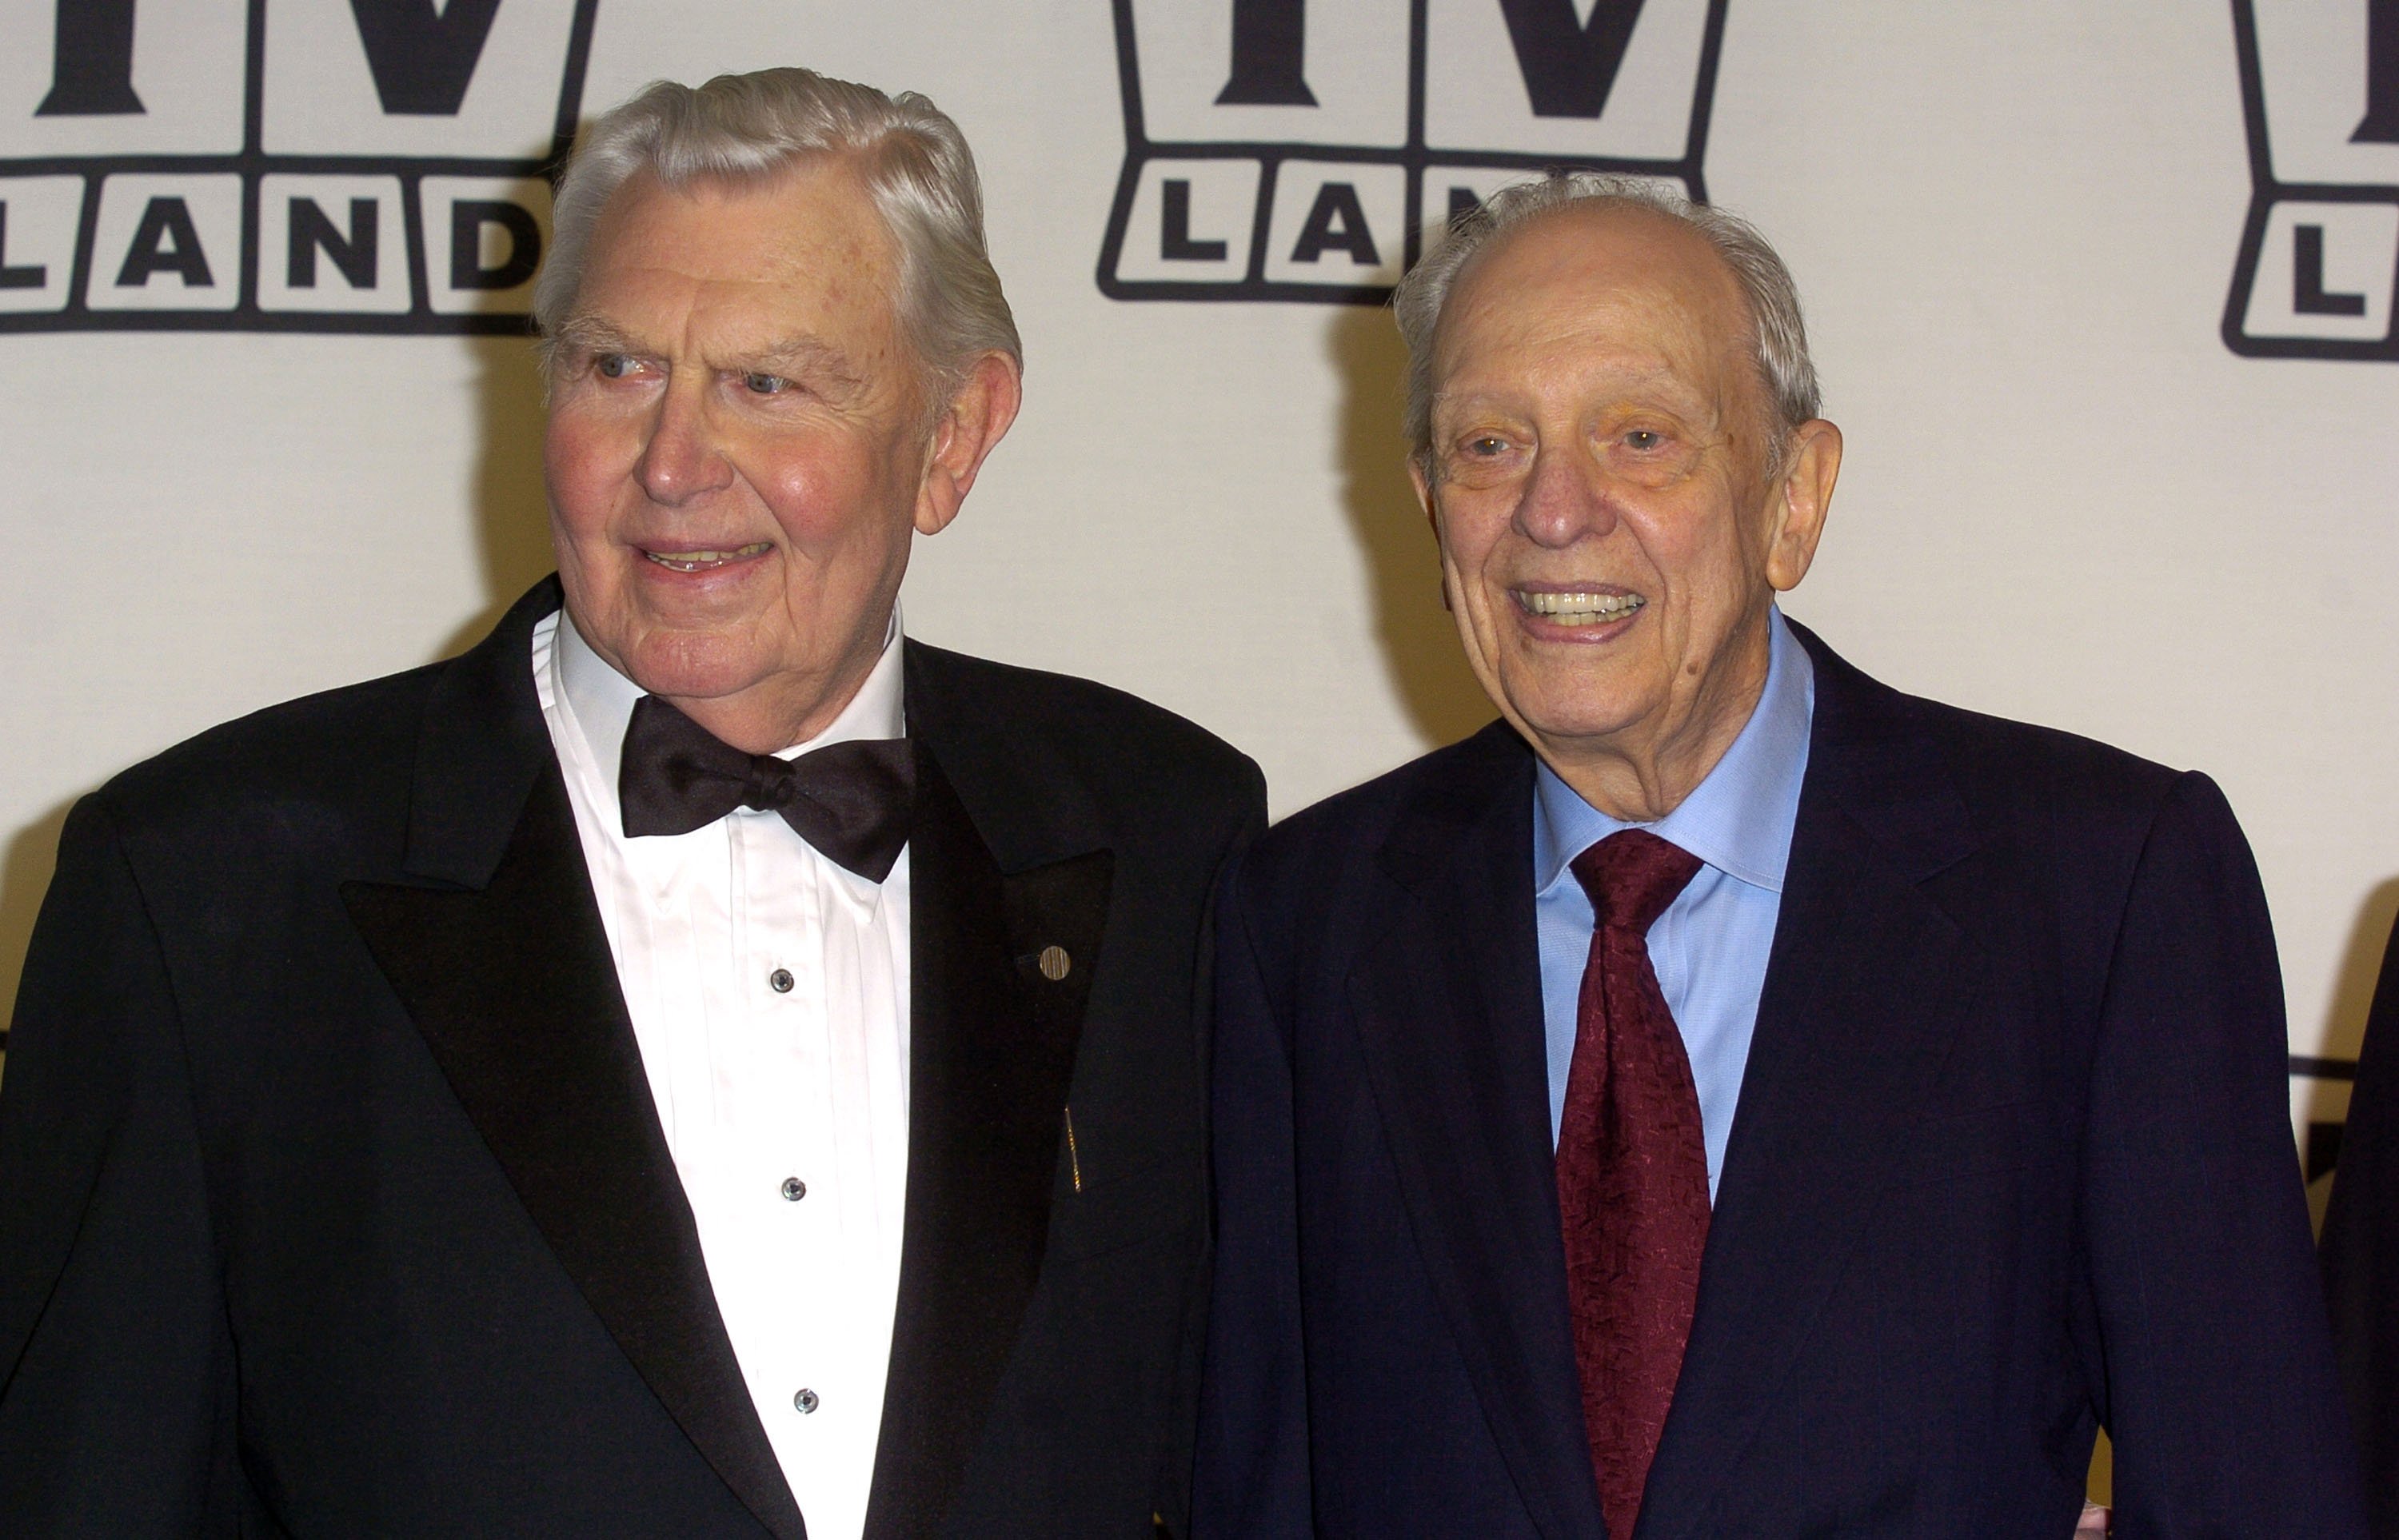 Andy Griffith and Don Knotts at the 2nd Annual TV Land Awards, 2004